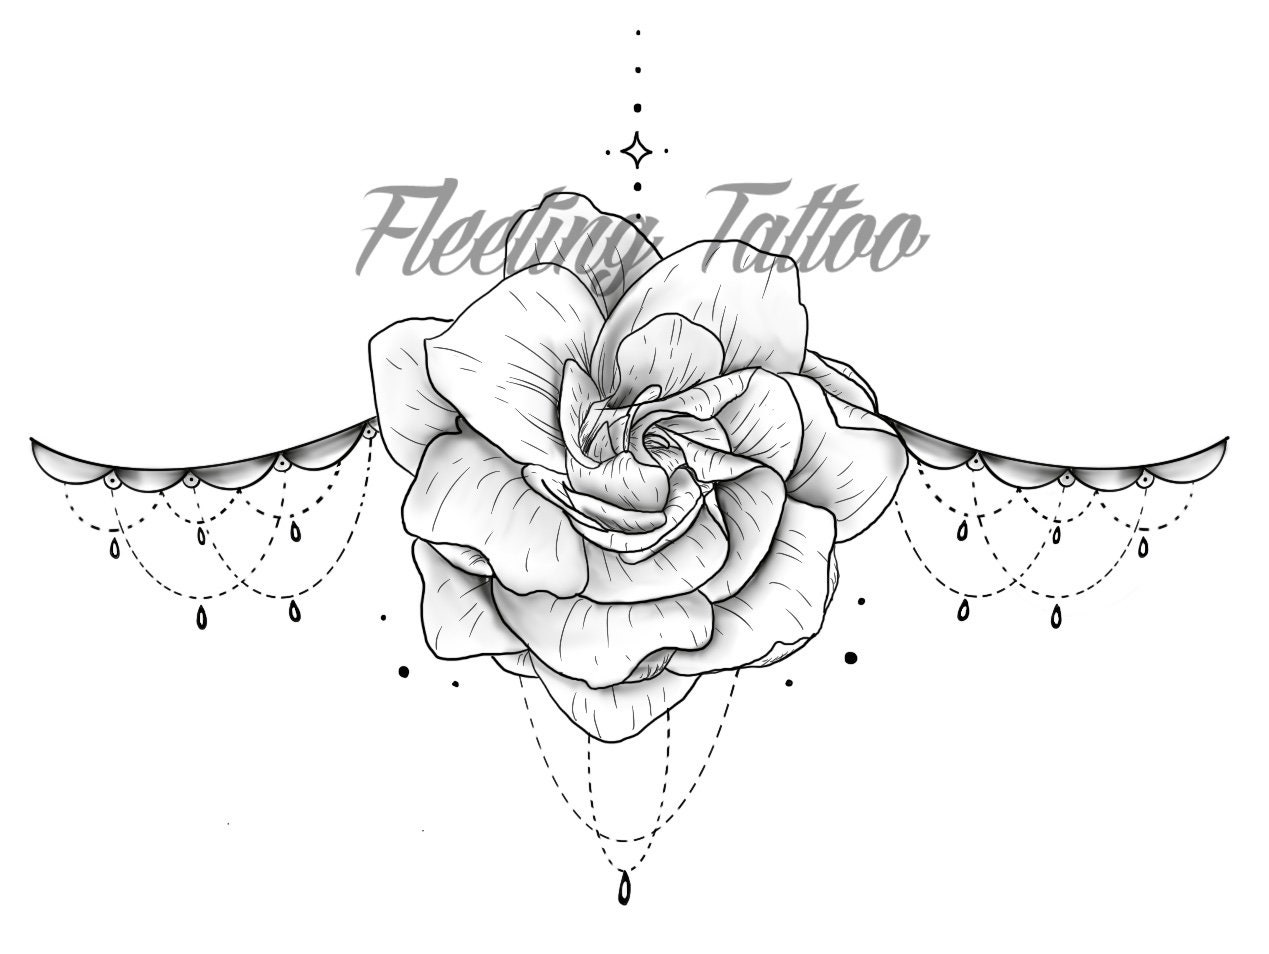 Cluster of flowers that include lotus, sunflower, chrysanthemum, jasmine  (or flower that symbolises luck), gardenia, mullein and gladiolus tattoo  idea | TattoosAI